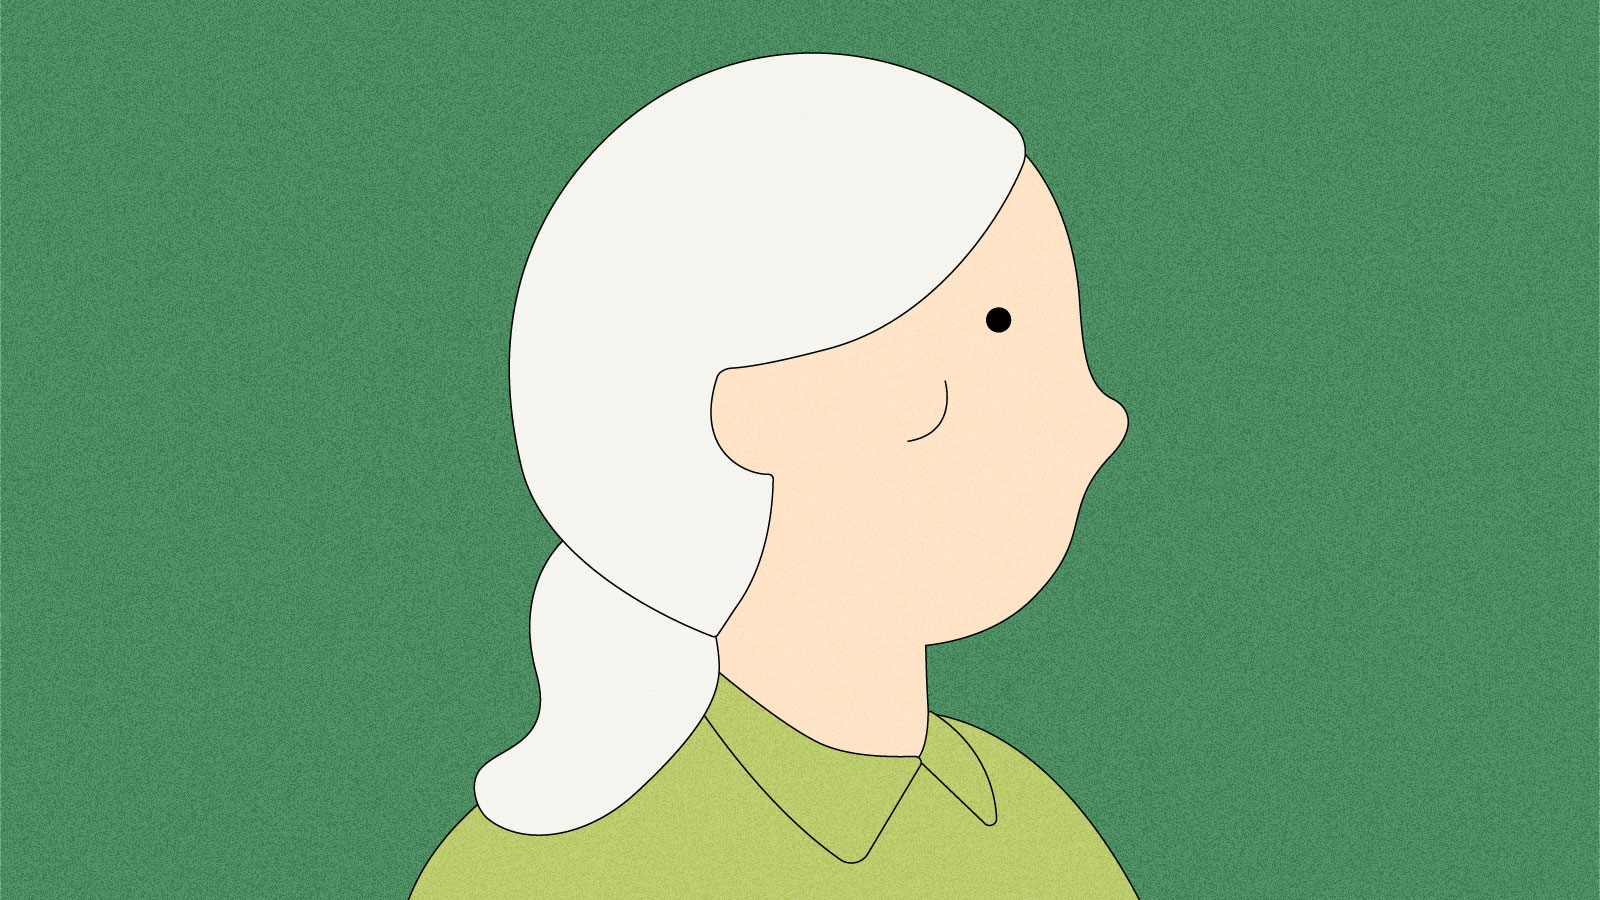 Jane Goodall’s legacy of empathy, curiosity, and courage - Grist